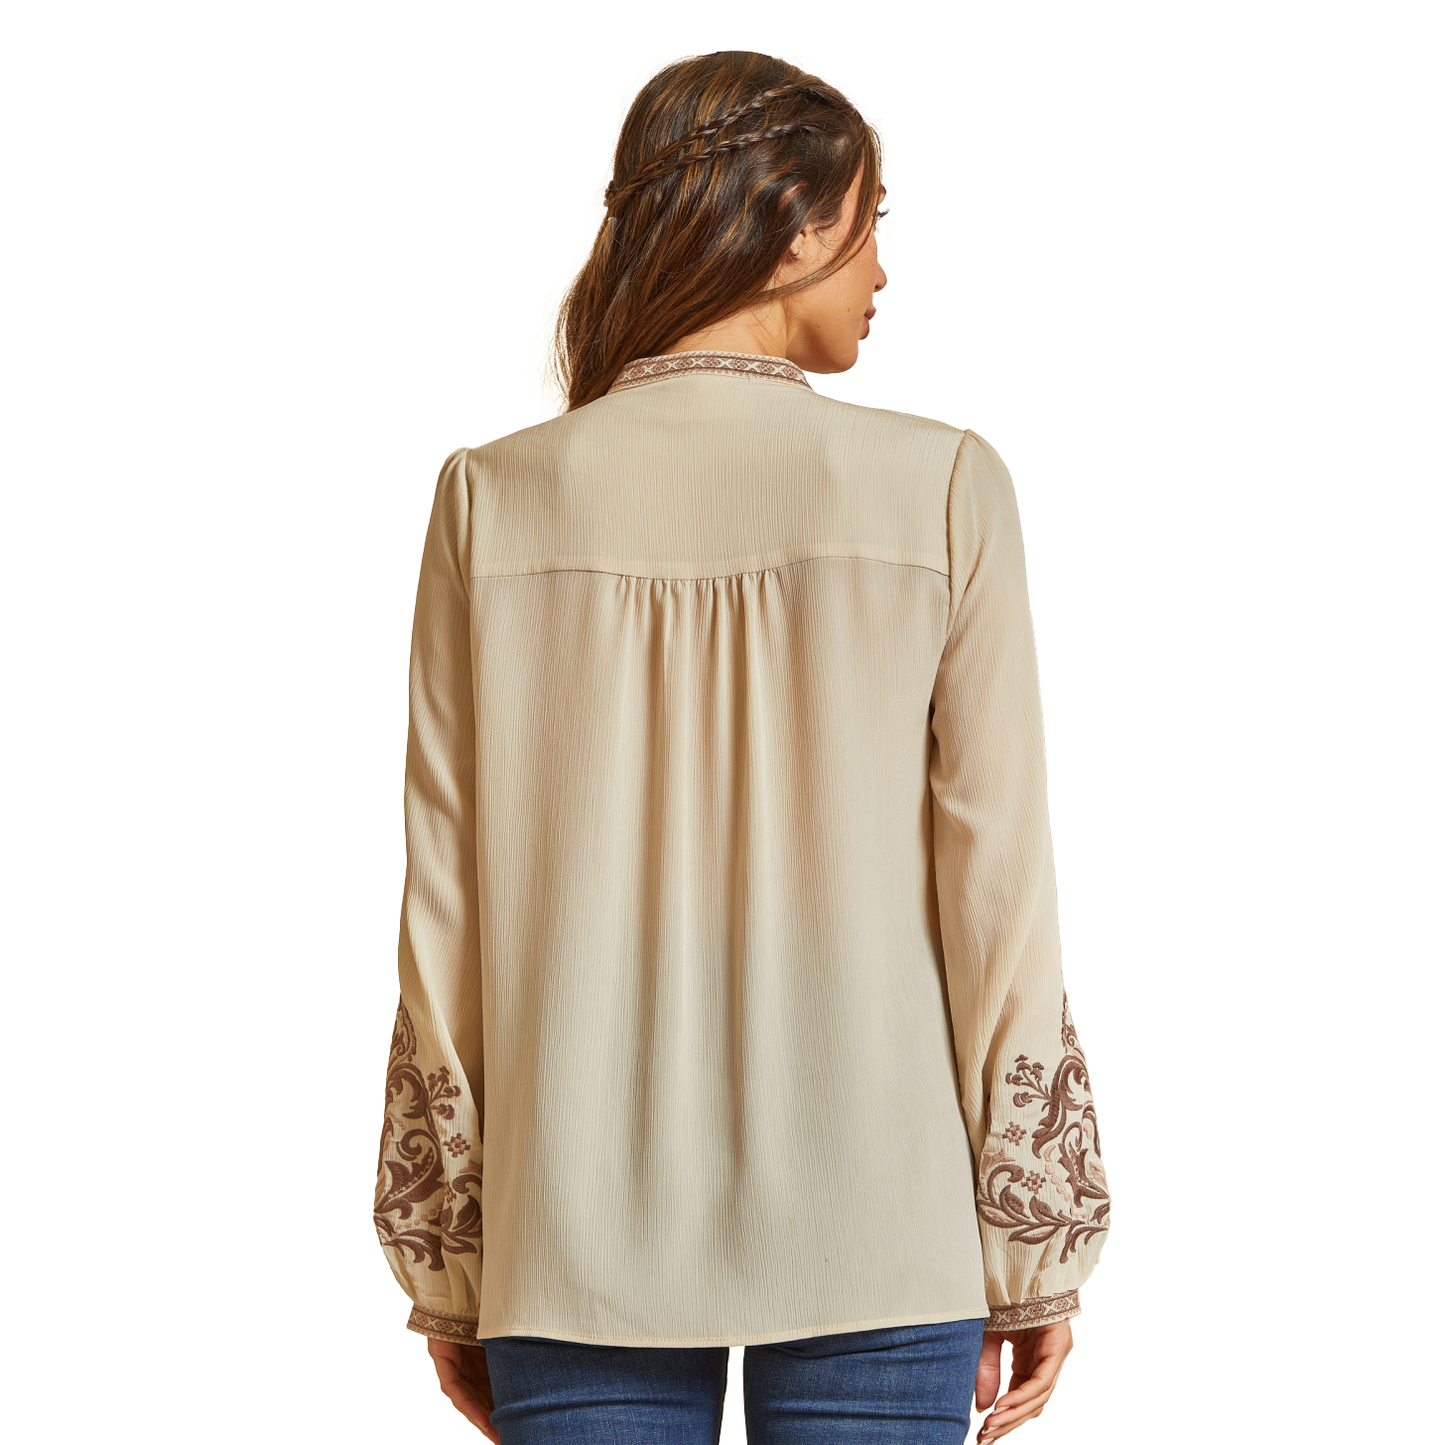 Maureen Embroidered Long Sleeve Tunic - Taupe